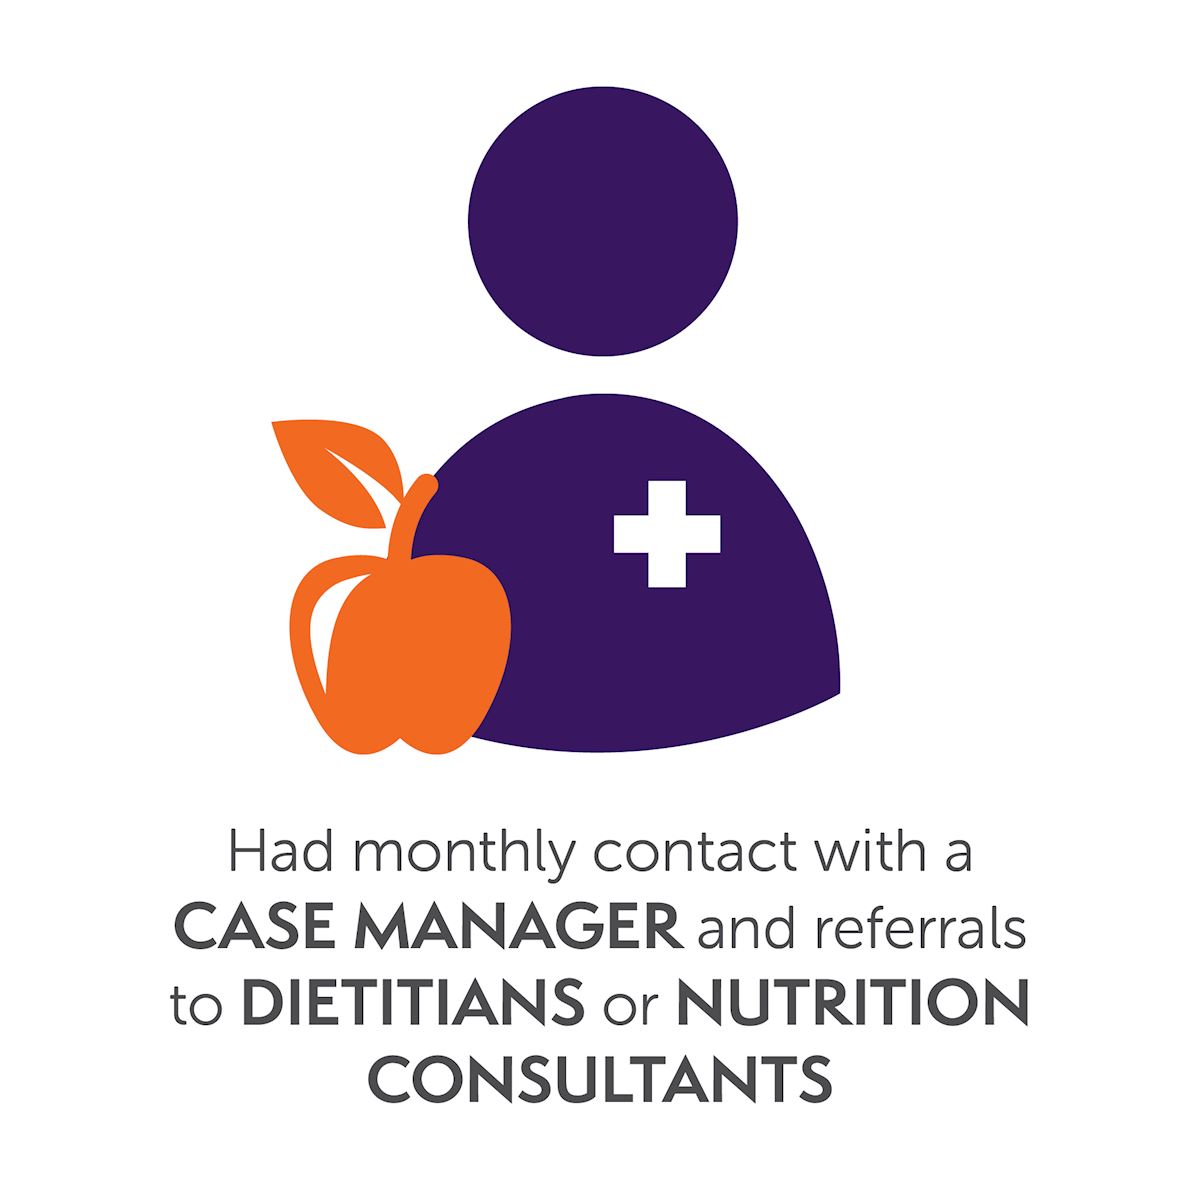 Had monthly contact with a case manager,  and referrals to dietitians or nutrition consultants